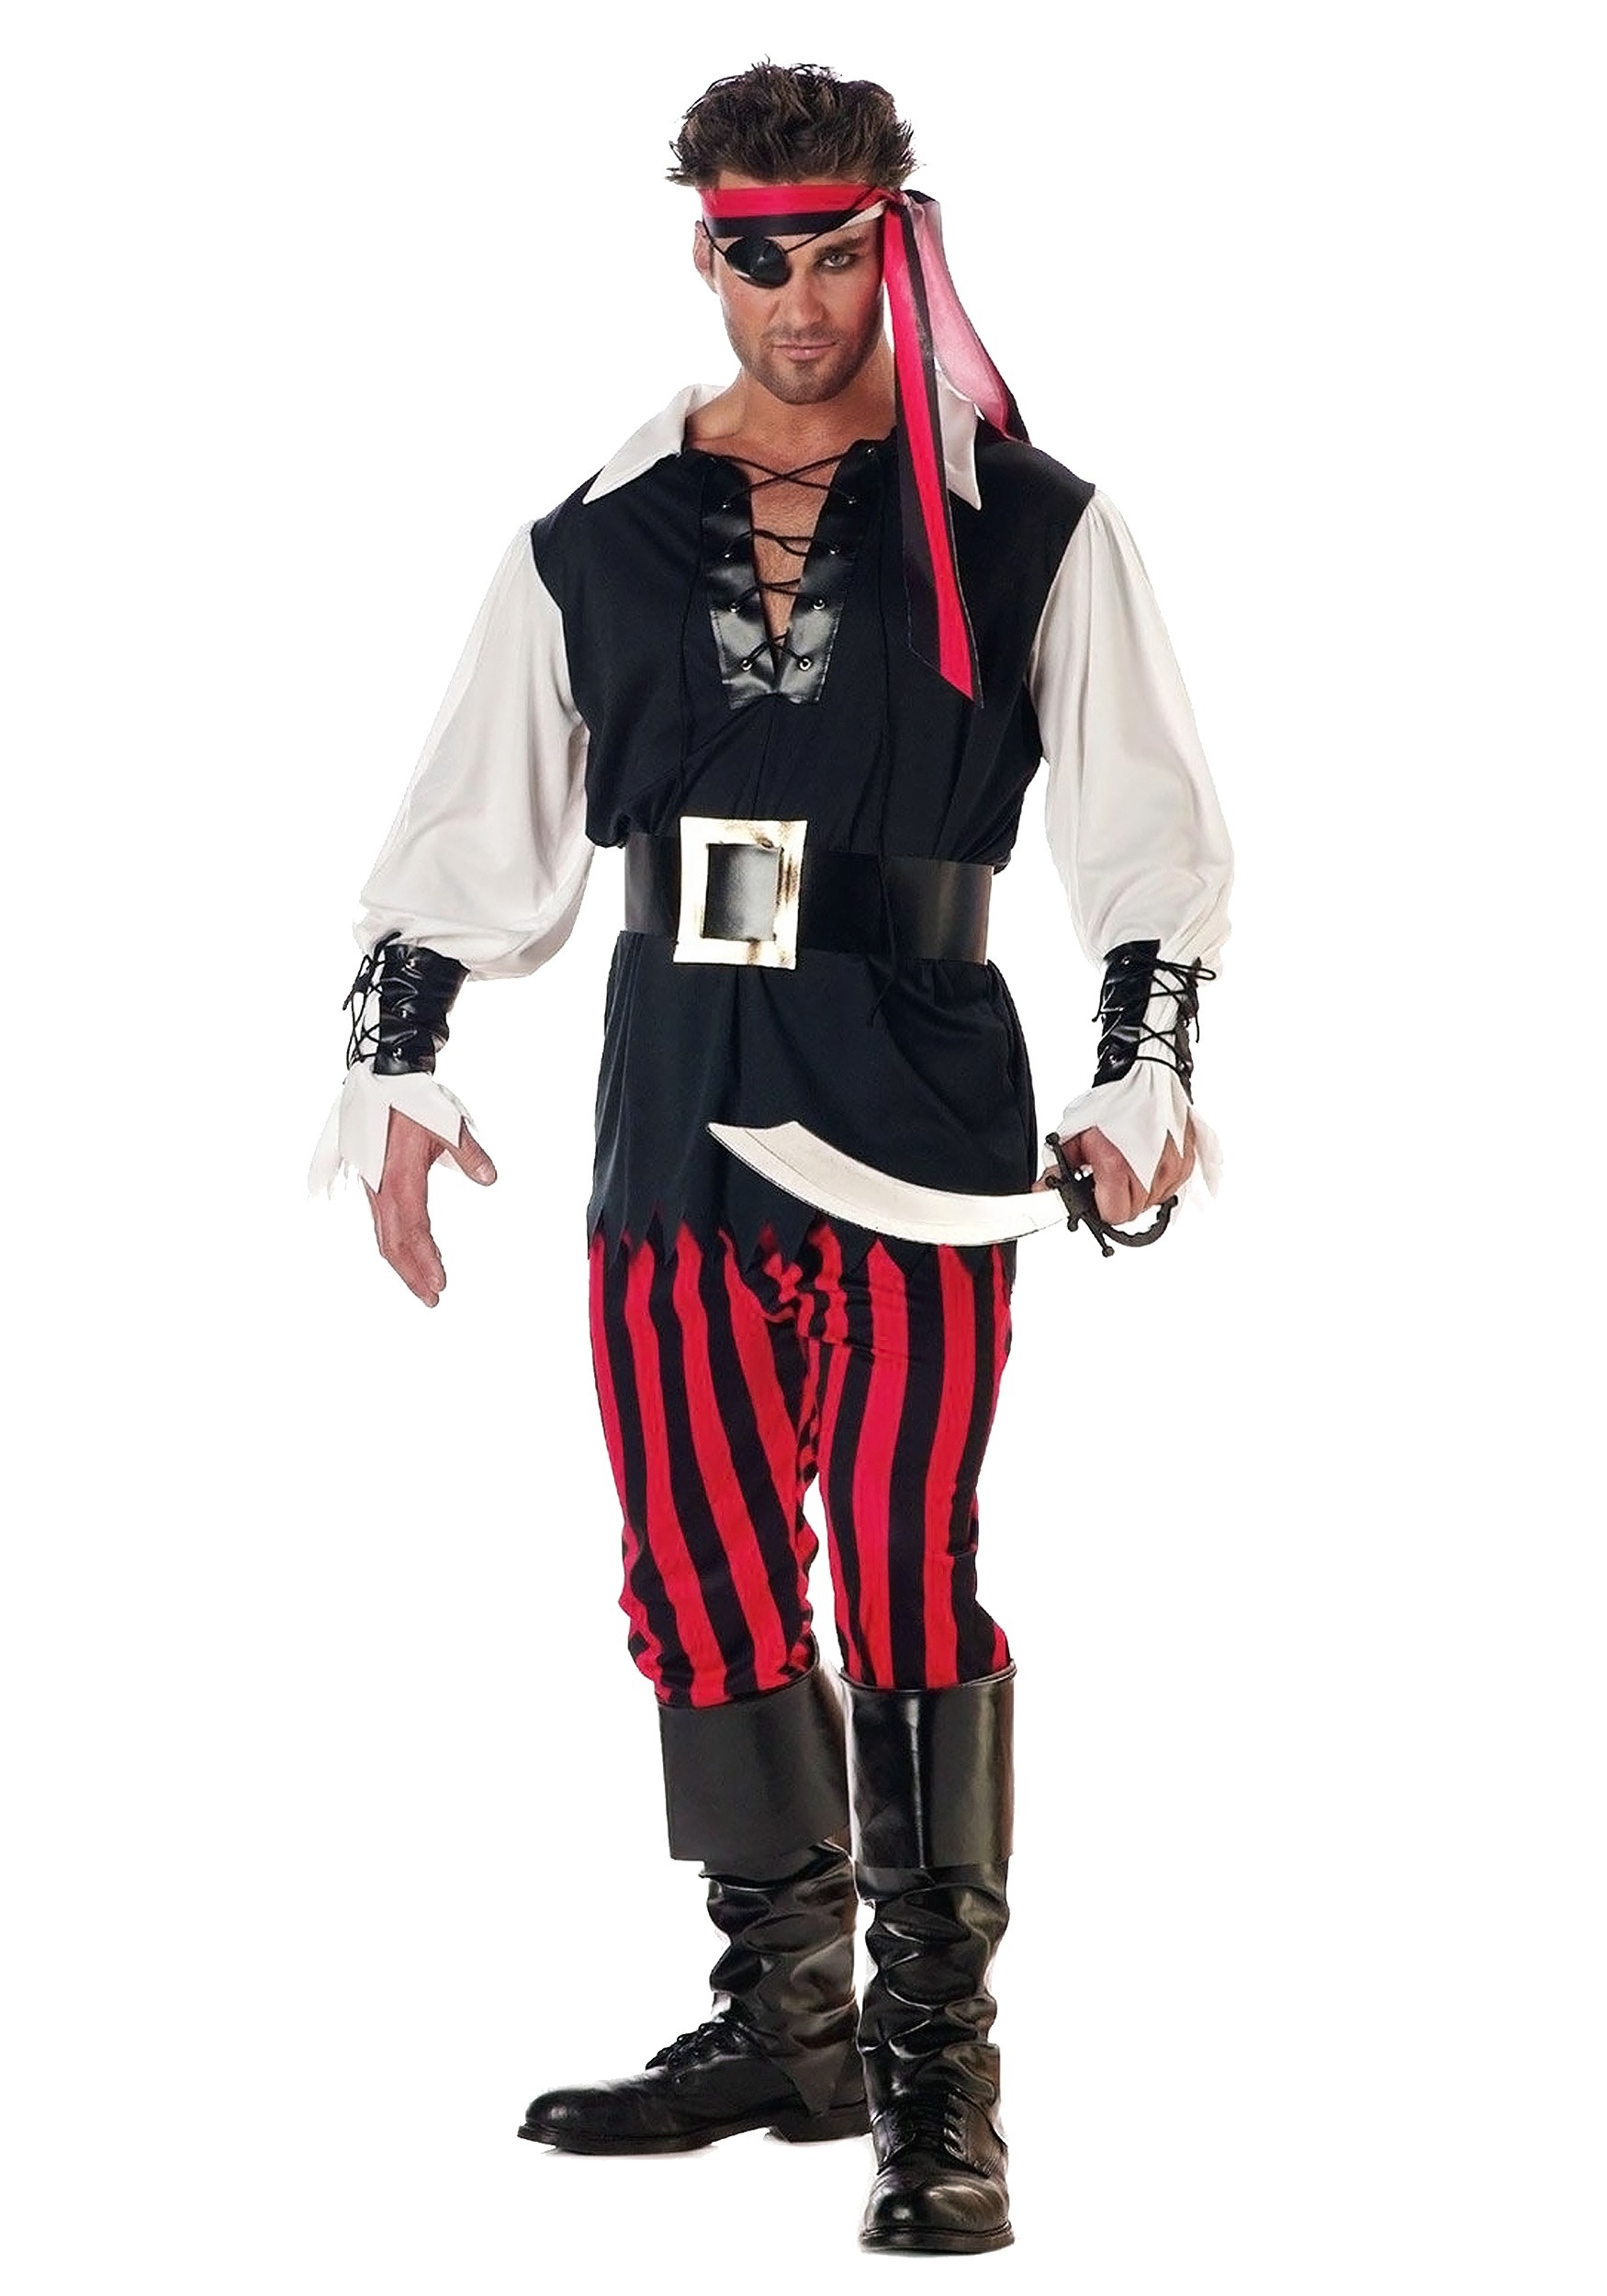 Photos - Fancy Dress California Costume Collection Cutthroat Pirate Costume for Men | Pirate Co 